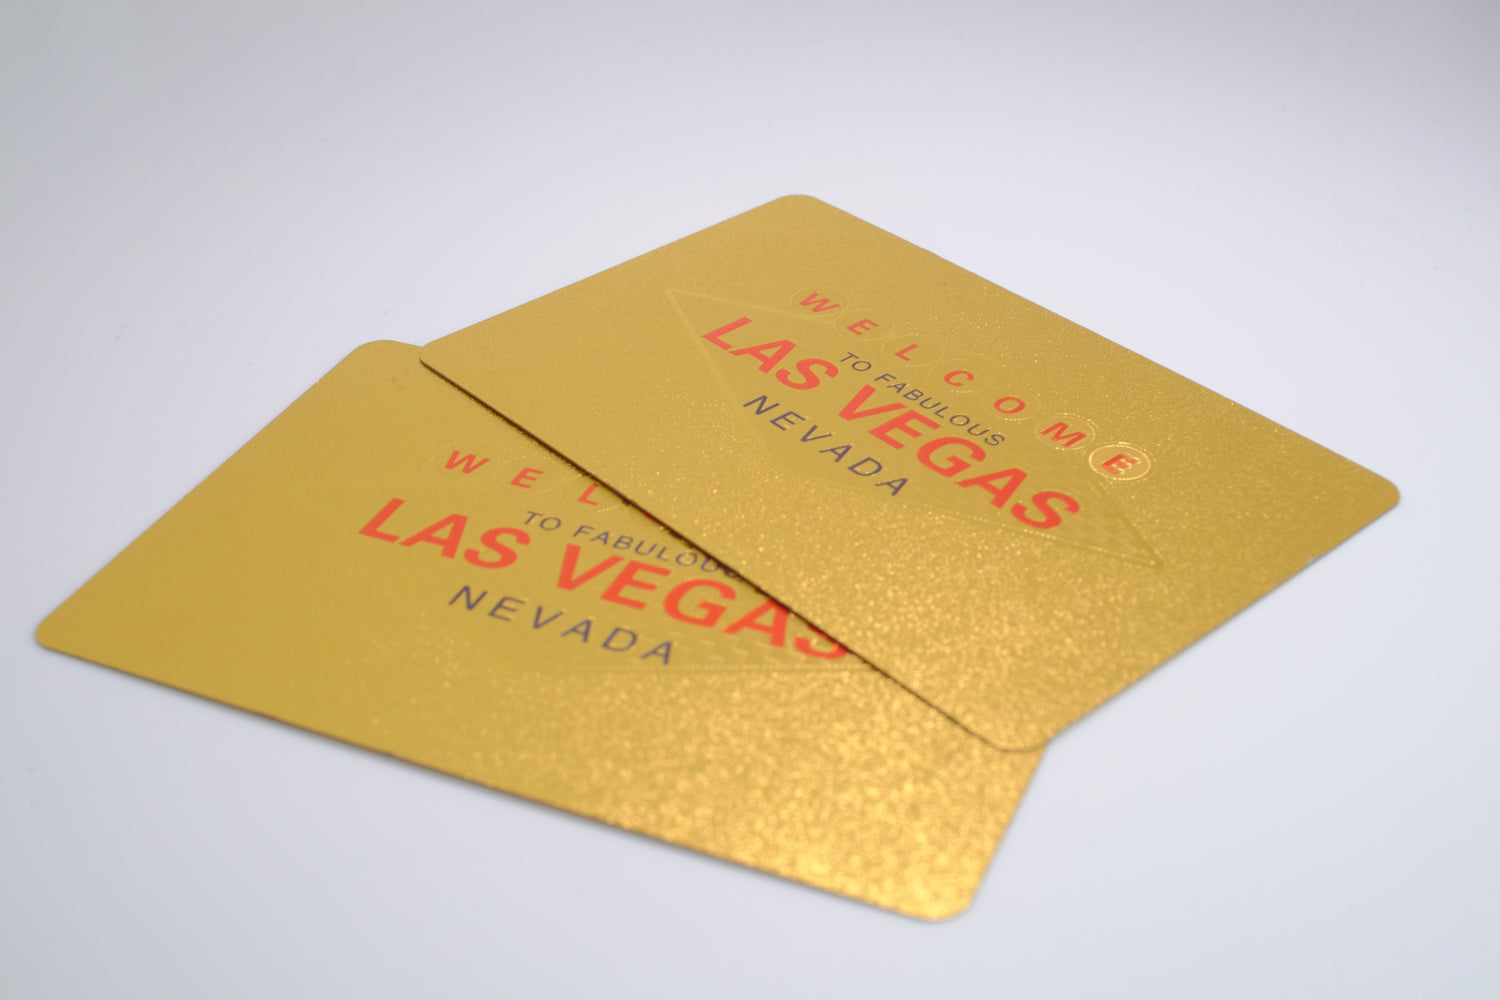 Las Vegas Welcome to Fabulous Sign Gold & Silver Foil Playing Cards - Las  Vegas - Stevens Books